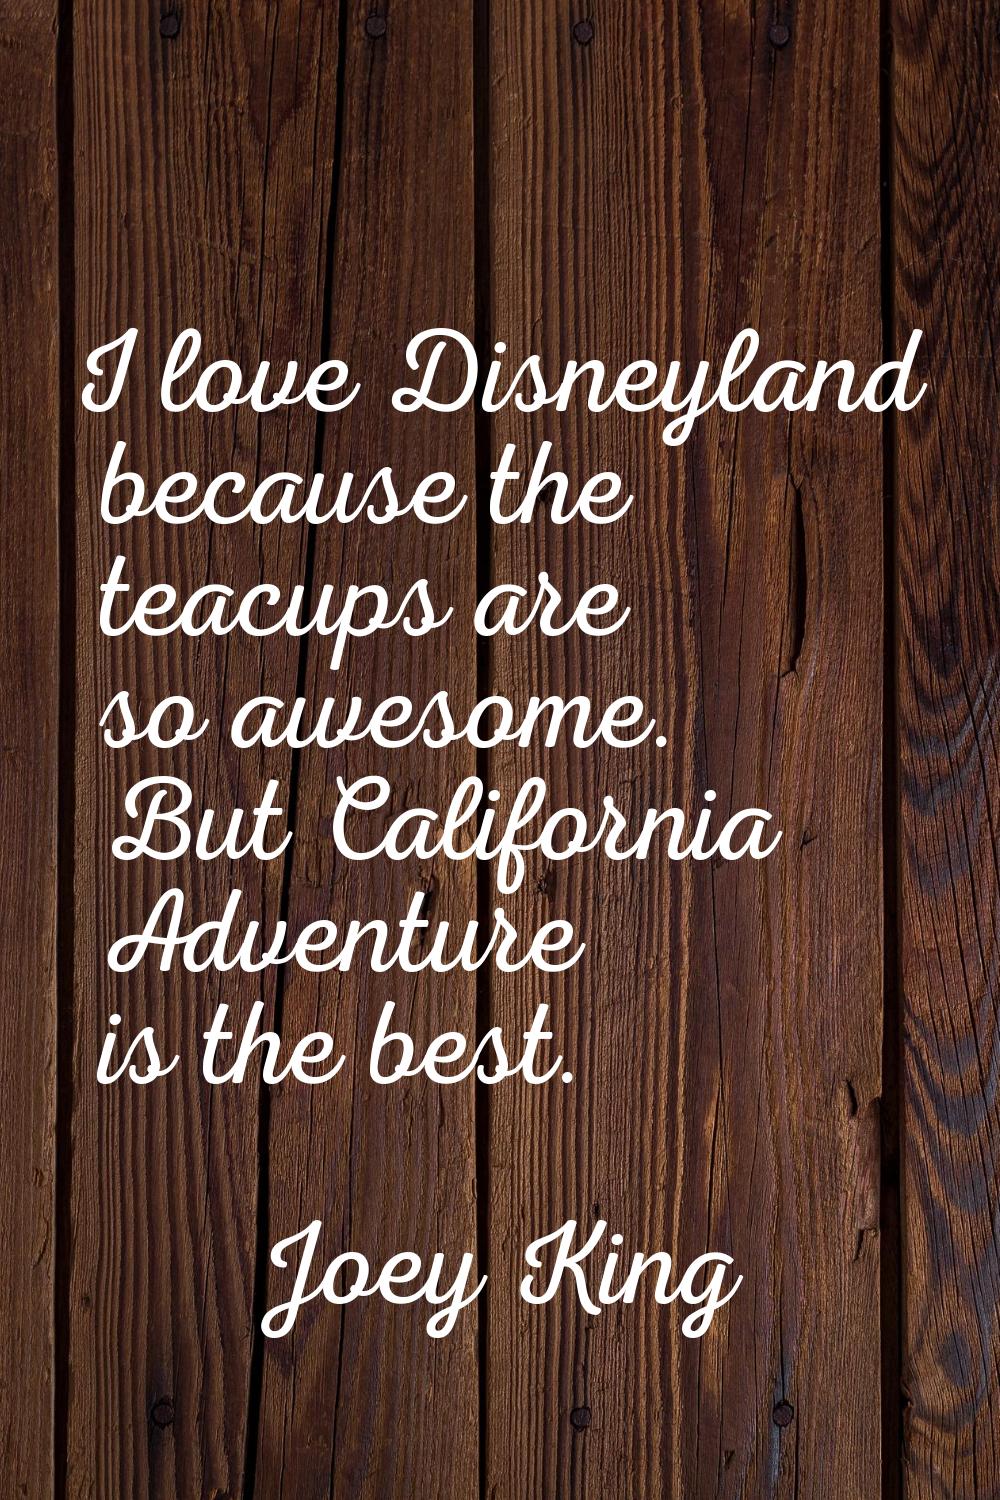 I love Disneyland because the teacups are so awesome. But California Adventure is the best.